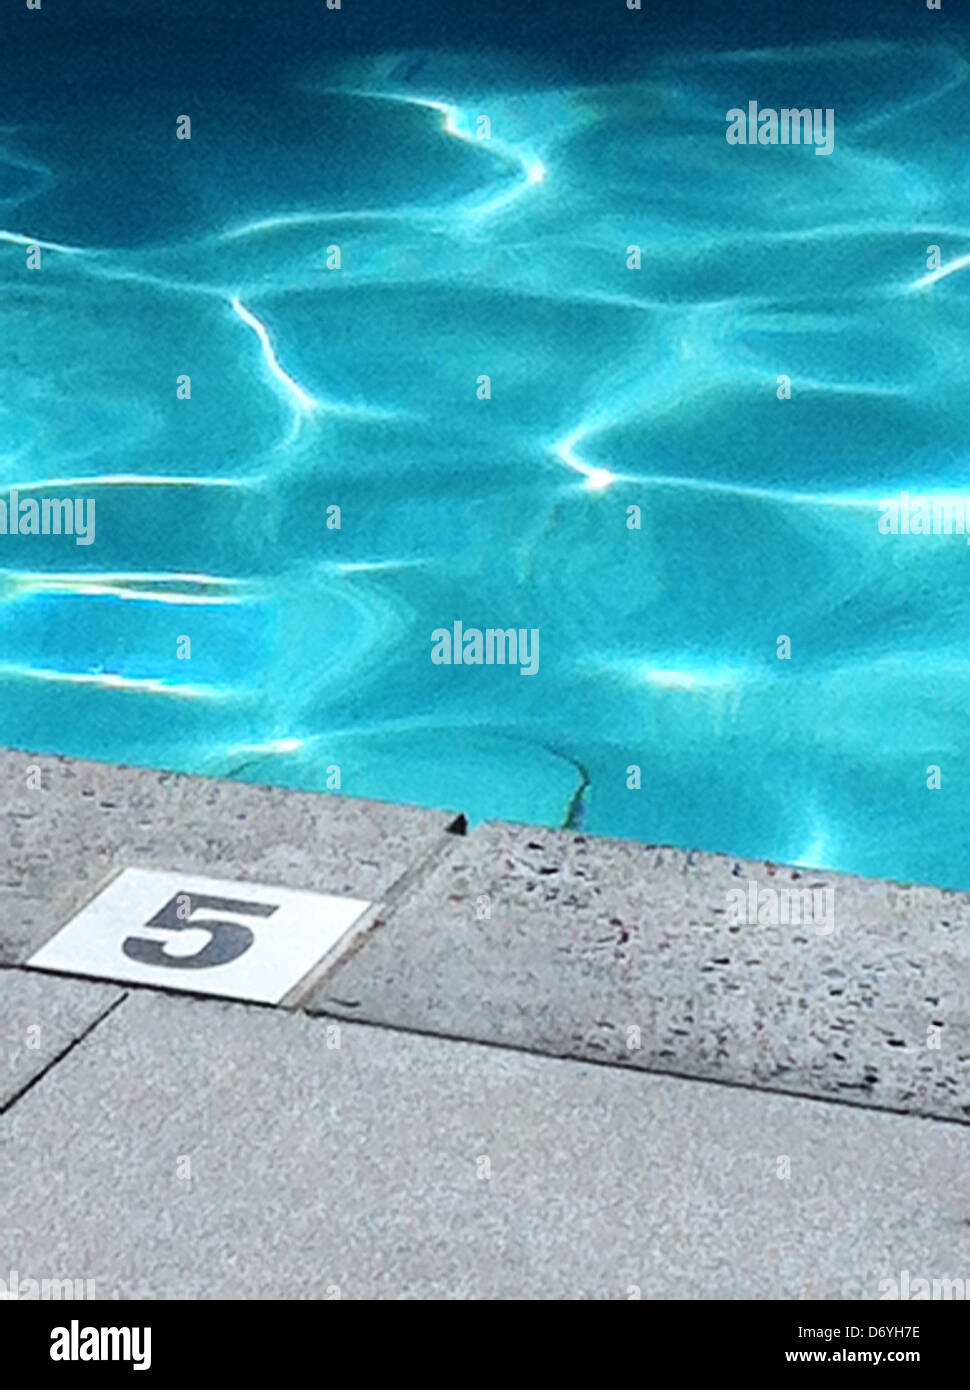 Five foot marker on edge of swimming pool Stock Photo